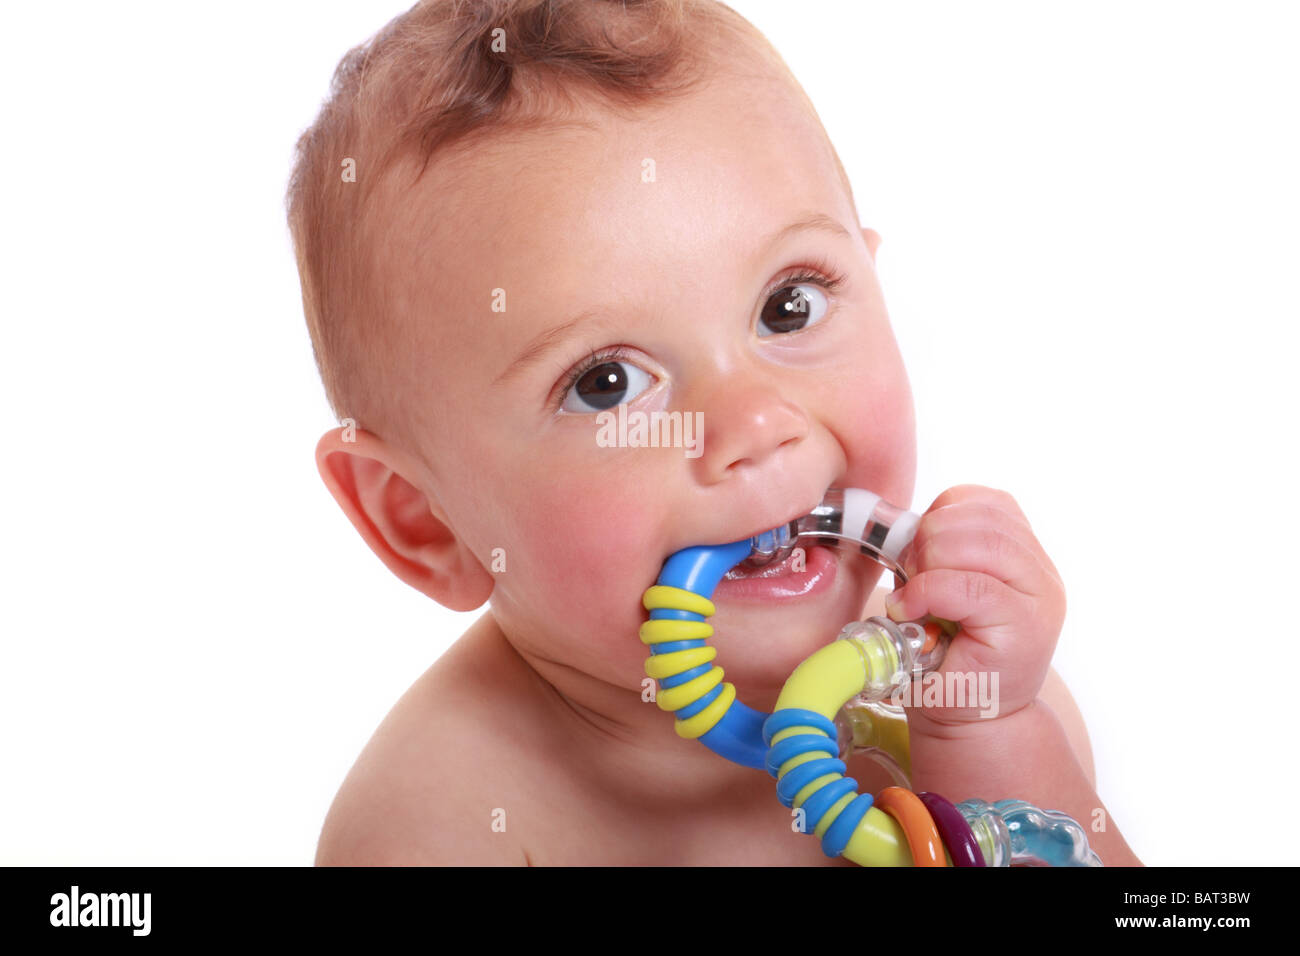 a 6 month old baby chewing on a toy teething aid boy Stock Photo